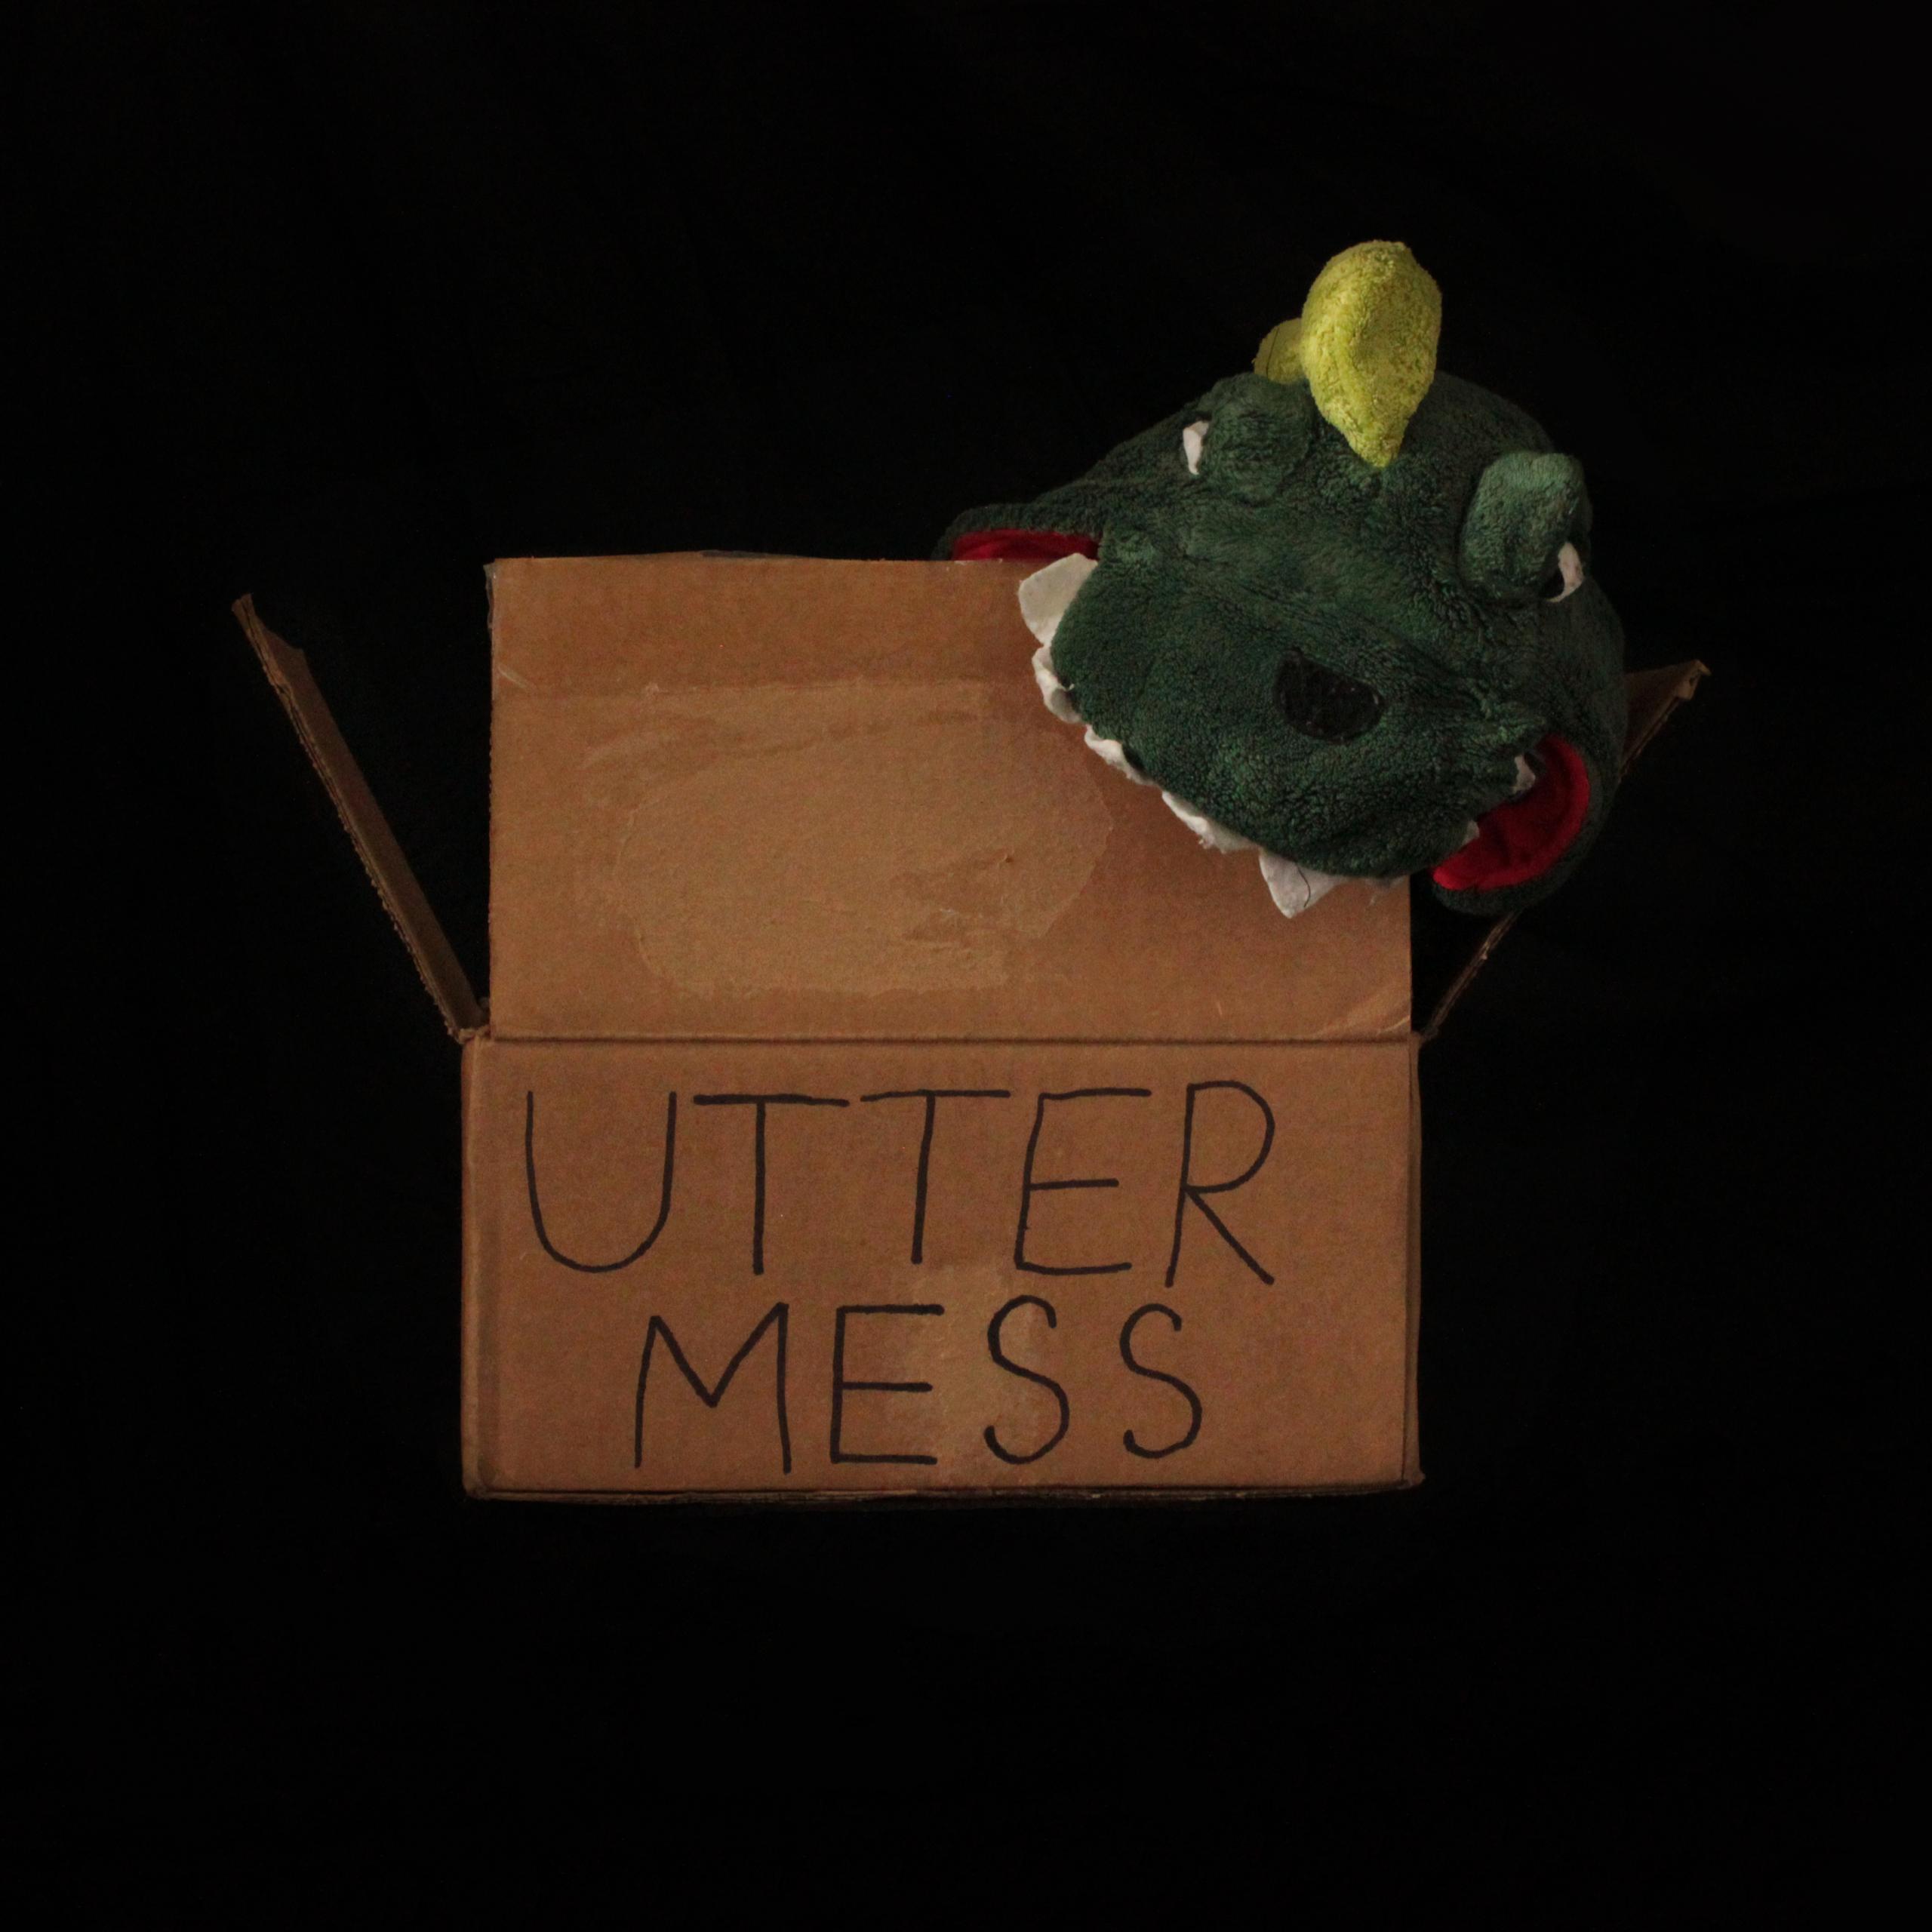 The image shows a cardboard box with the words 